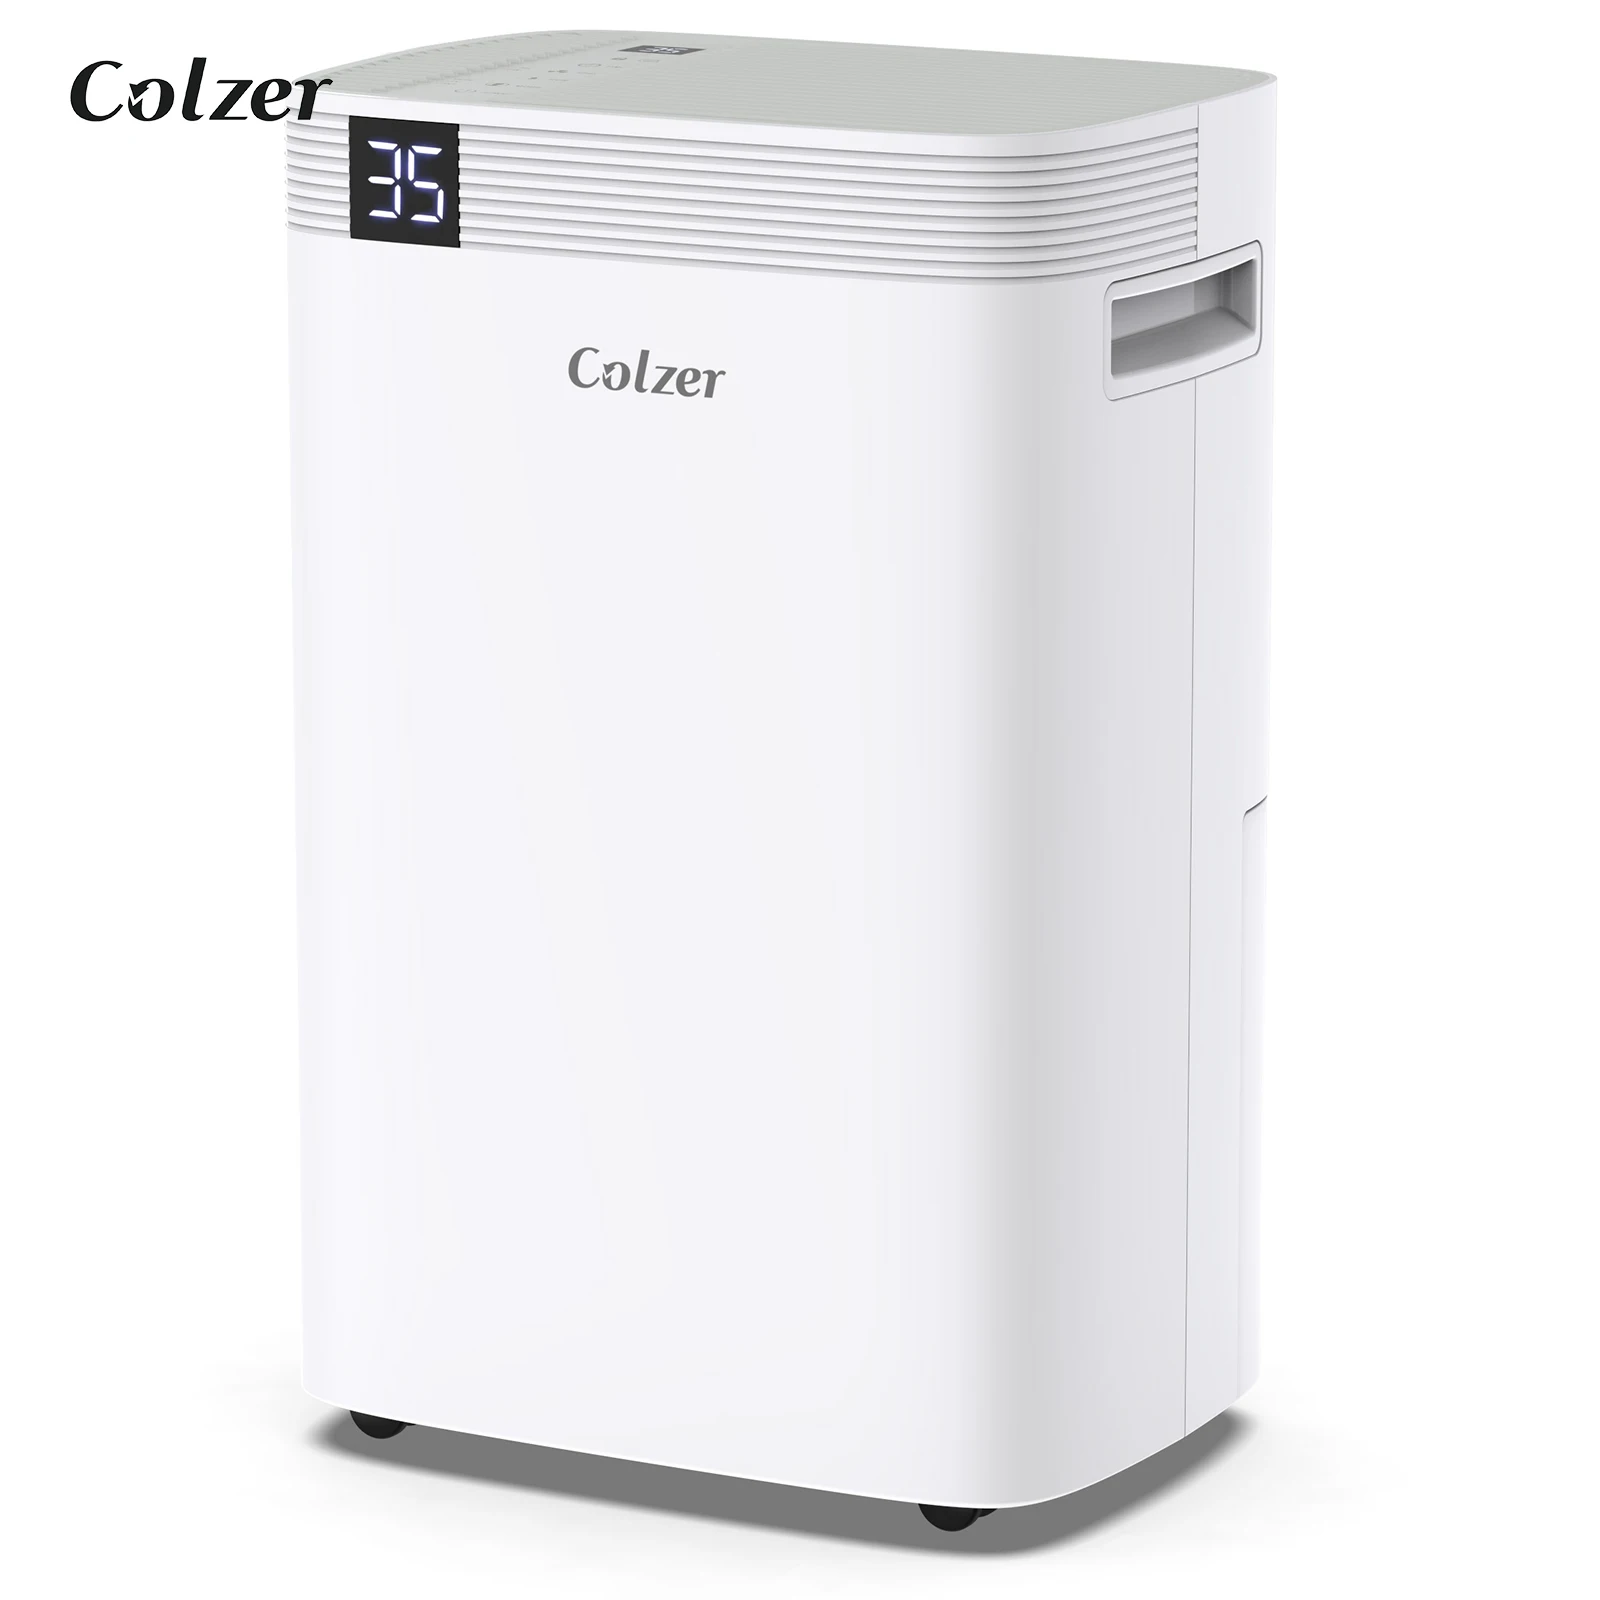 Colzer Home Dehumidifier Easy To Use 50 Pints / Day 3500 Sq 